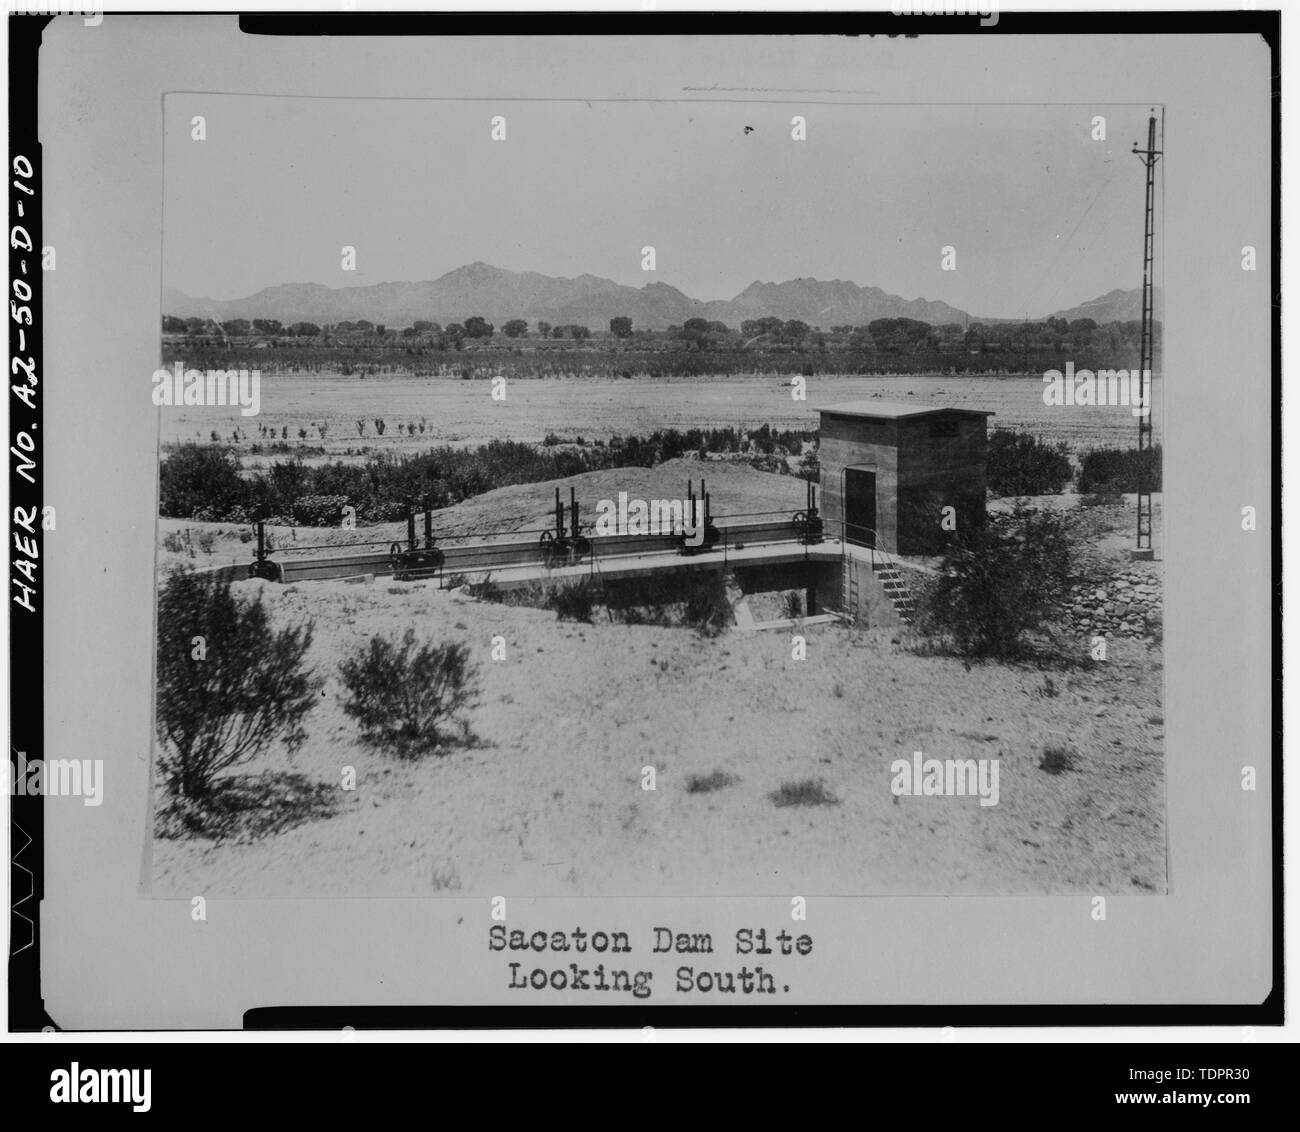 Photographic copy of photograph. (Source- U.S. Department of Interior. Office of Indian Affairs. Indian Irrigation Service. Annual Report, Fiscal Year 1919. Vol. I, RG 75, Entry 655, BOx 25, National Archives, Washington, D.C.) Photographer unknown. SACATION DAM SITE LOOKING SOUTH SHOWING HEADWORKS OF SAN TAN FLOOD-WATER CANAL - San Carlos Irrigation Project, Sacaton Dam and Bridge, Gila River, T4S R6E S12-13, Coolidge, Pinal County, AZ Stock Photo